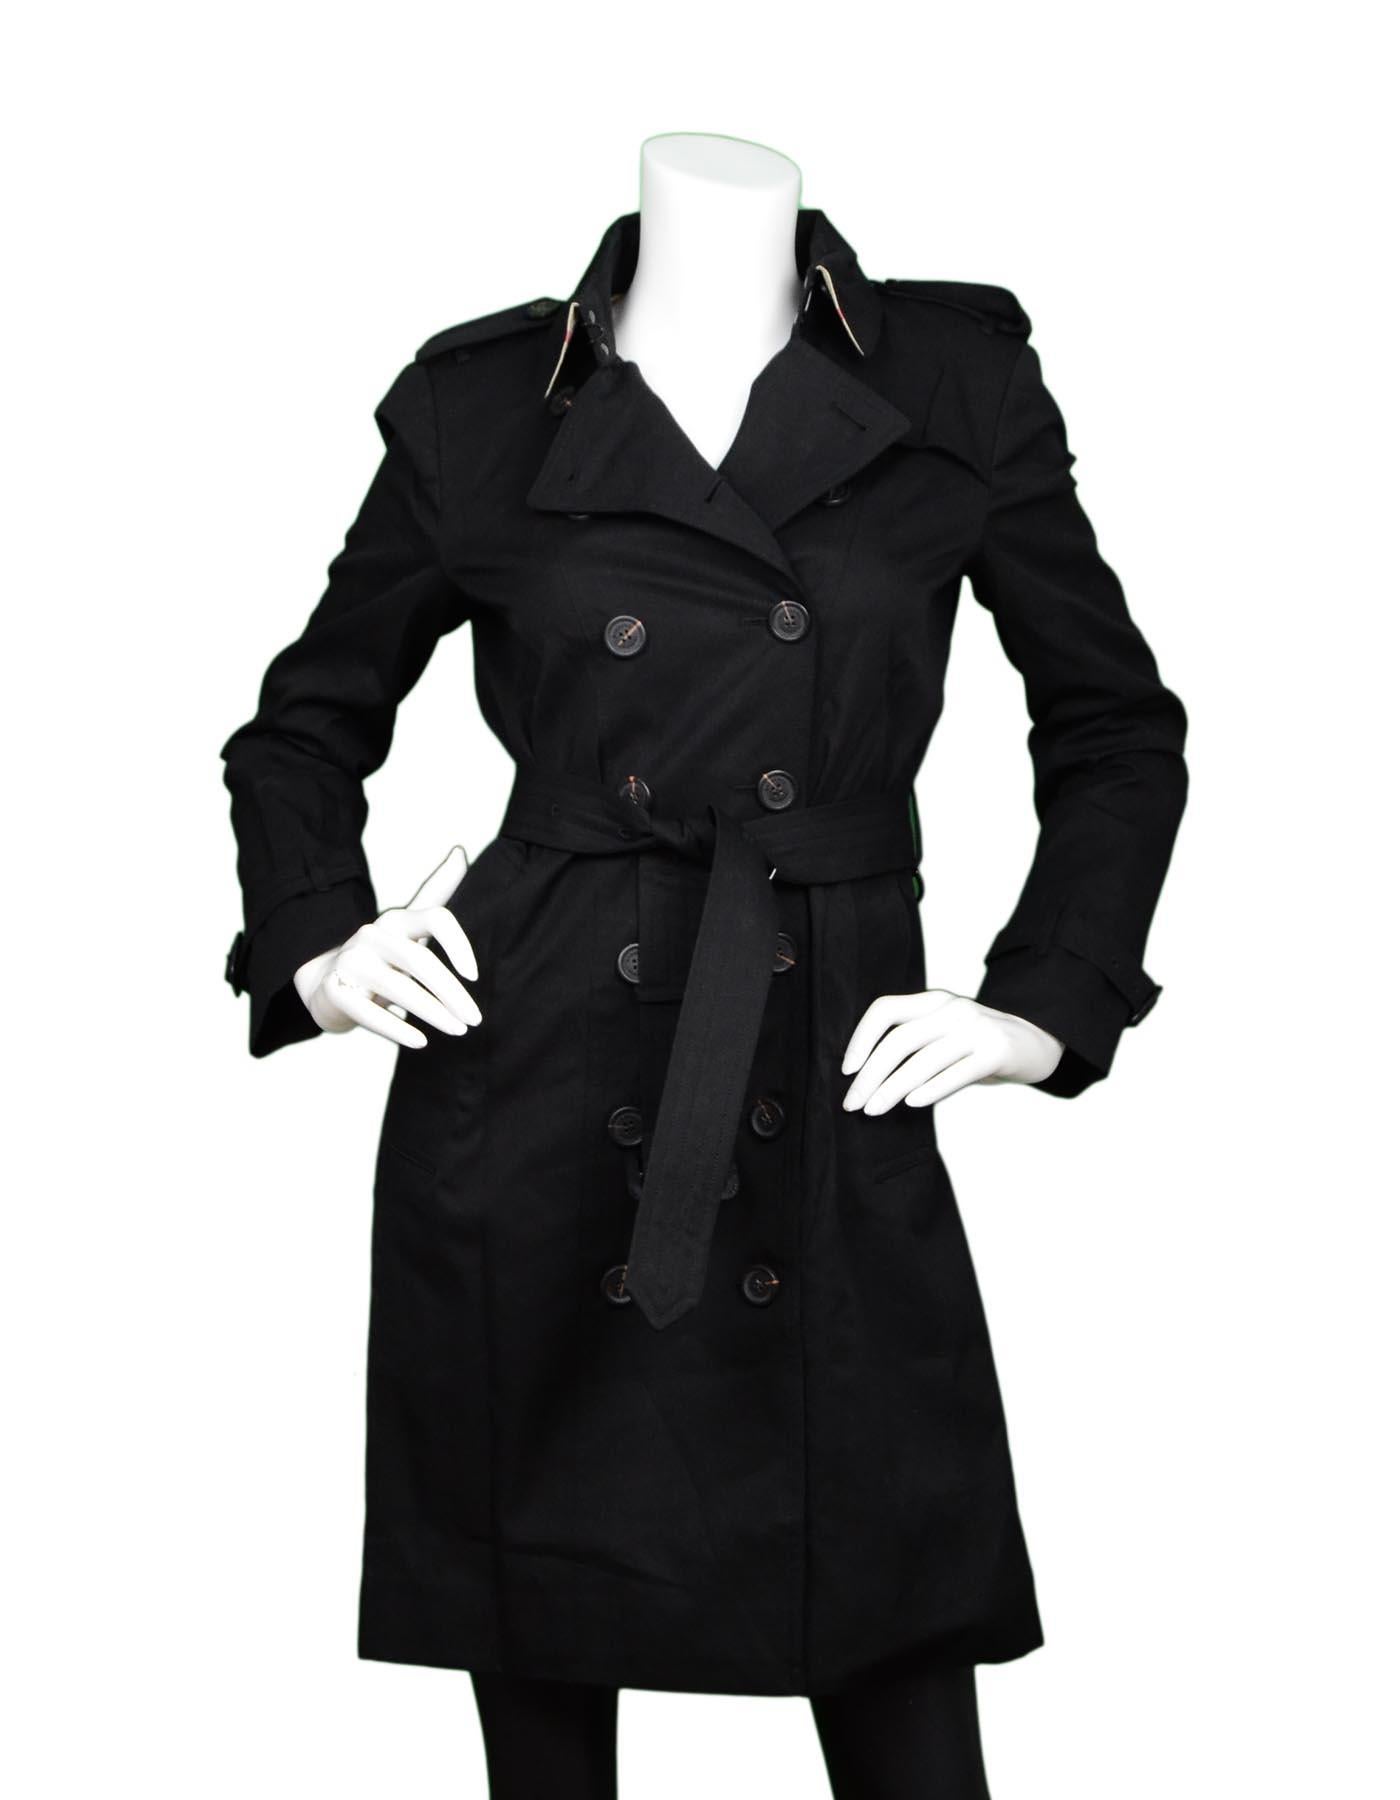 Burberry Black Double Breasted Sandringham Trench Coat W/ Belt & Garment Bag Sz 6

Made In: London
Color: Black
Materials: 100% cotton
Lining: 100% cotton, tan, black, red, white tartan print
Opening/Closure: Double breasted button
Overall